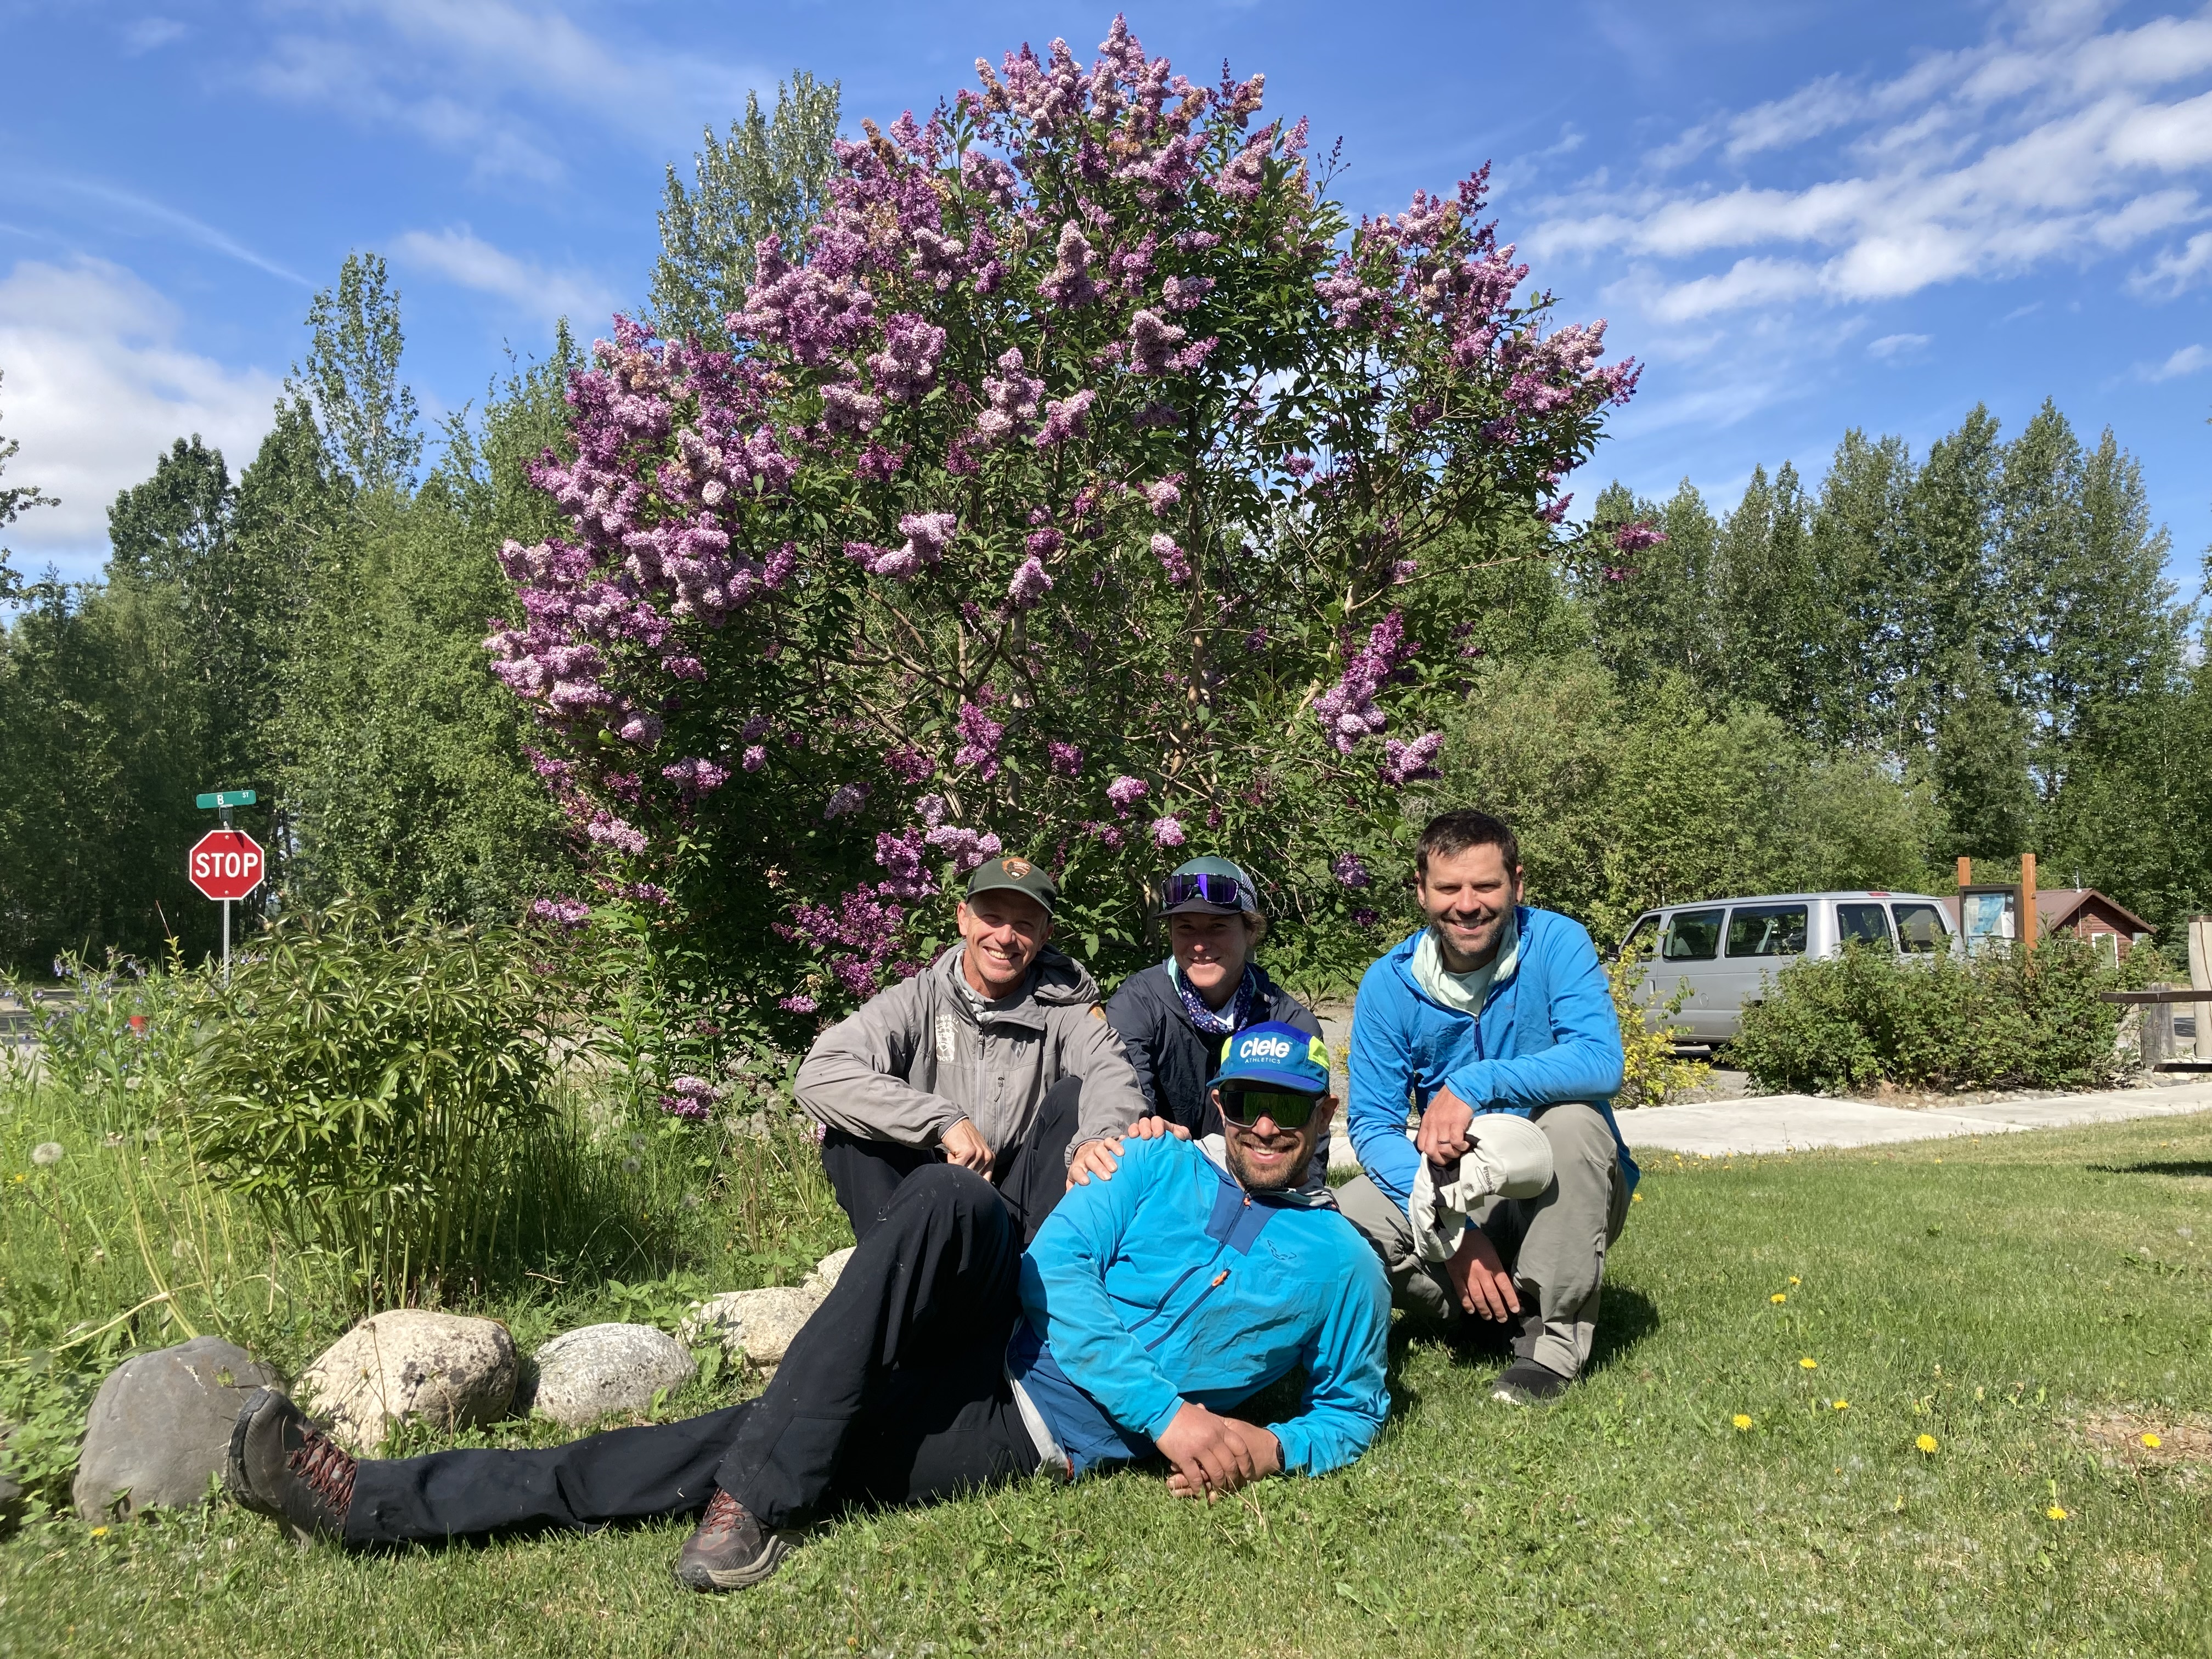 Four climbers sit on a lawn in front of a flowering lilac tree